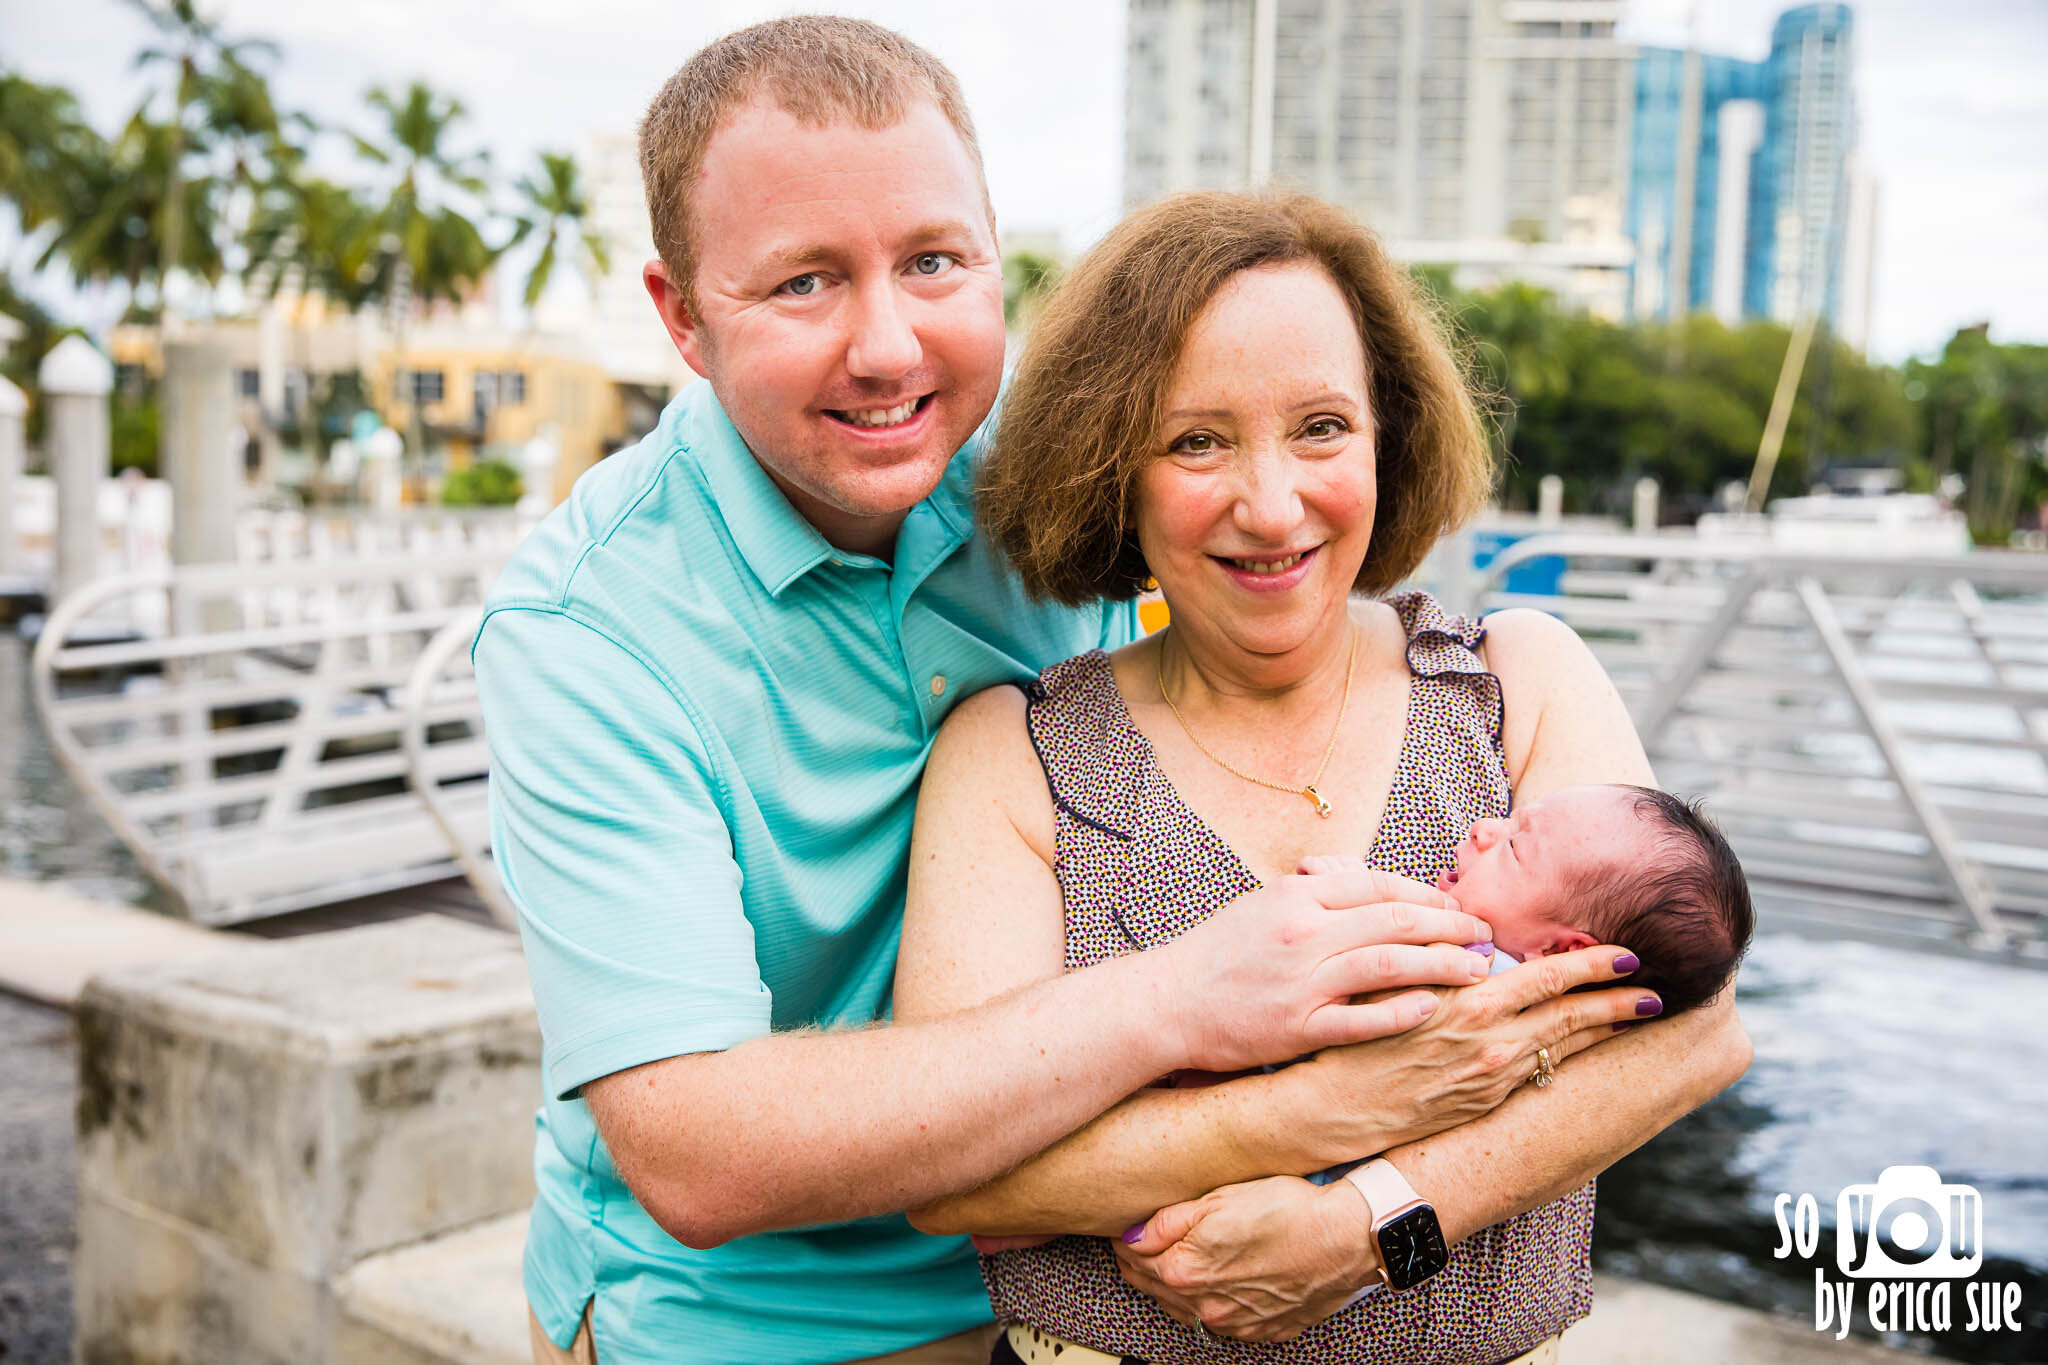 20-so-you-by-erica-sue-riverwalk-ft-lauderdale-extended-family-newborn-photographer-CD8A7360.jpg